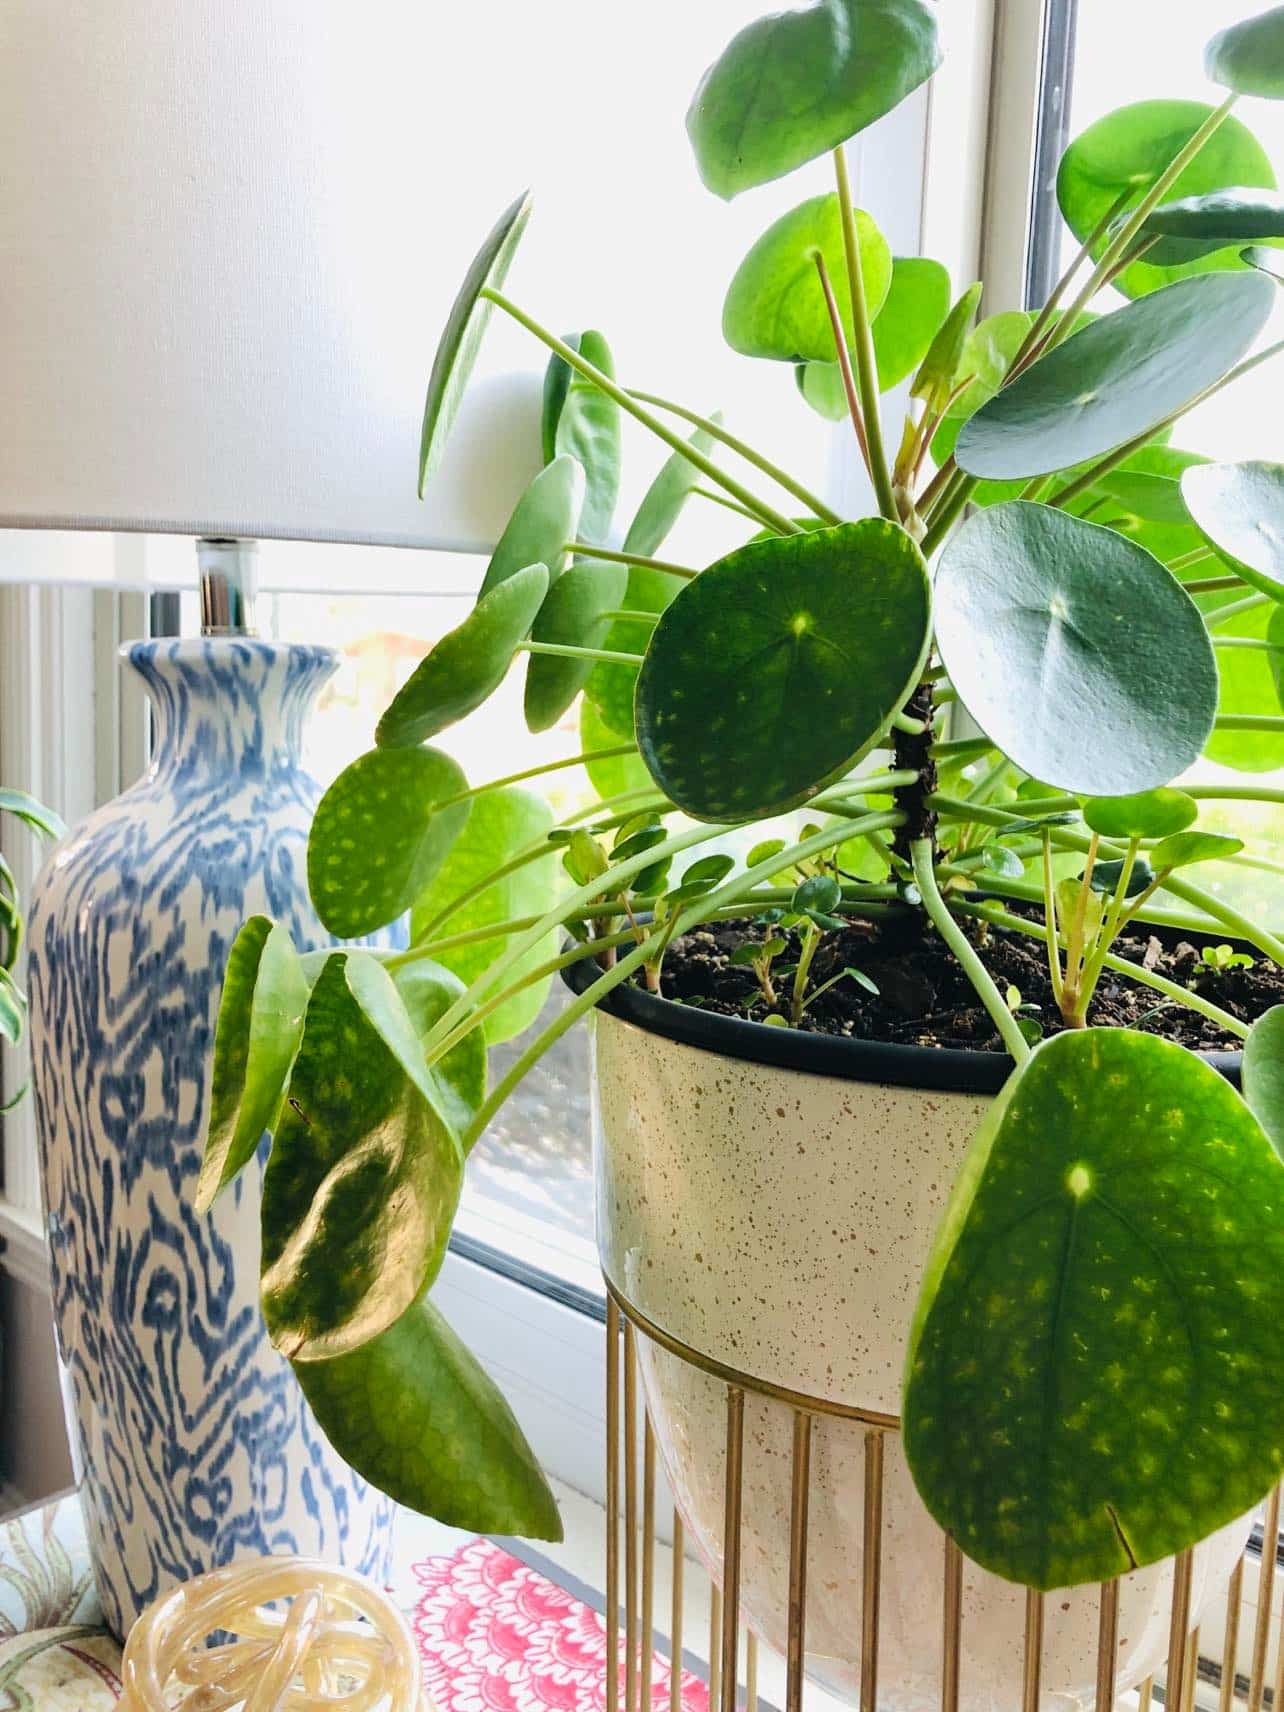 My 5 Favorite Easy Care Indoor Plants That Are Hard to Kill…and One That Defies the Odds